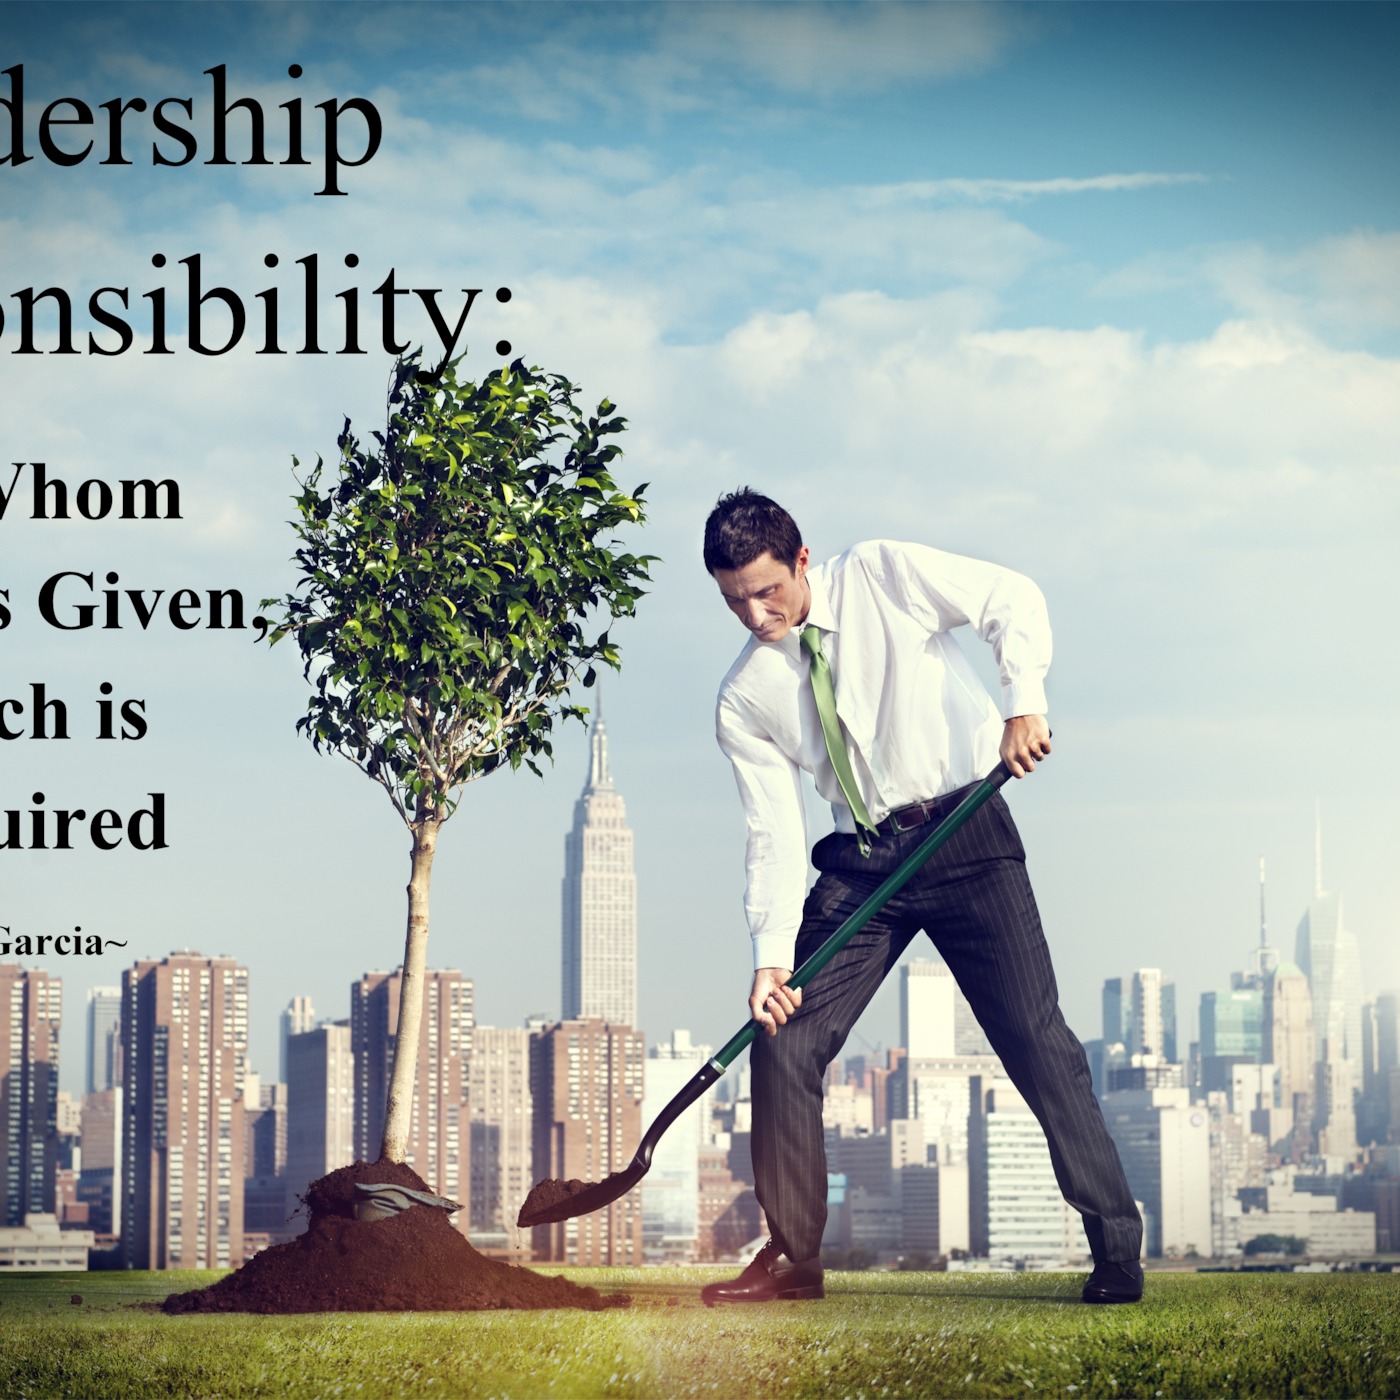 Leadership Responsibility: To Whom Much is Given, Much is Required